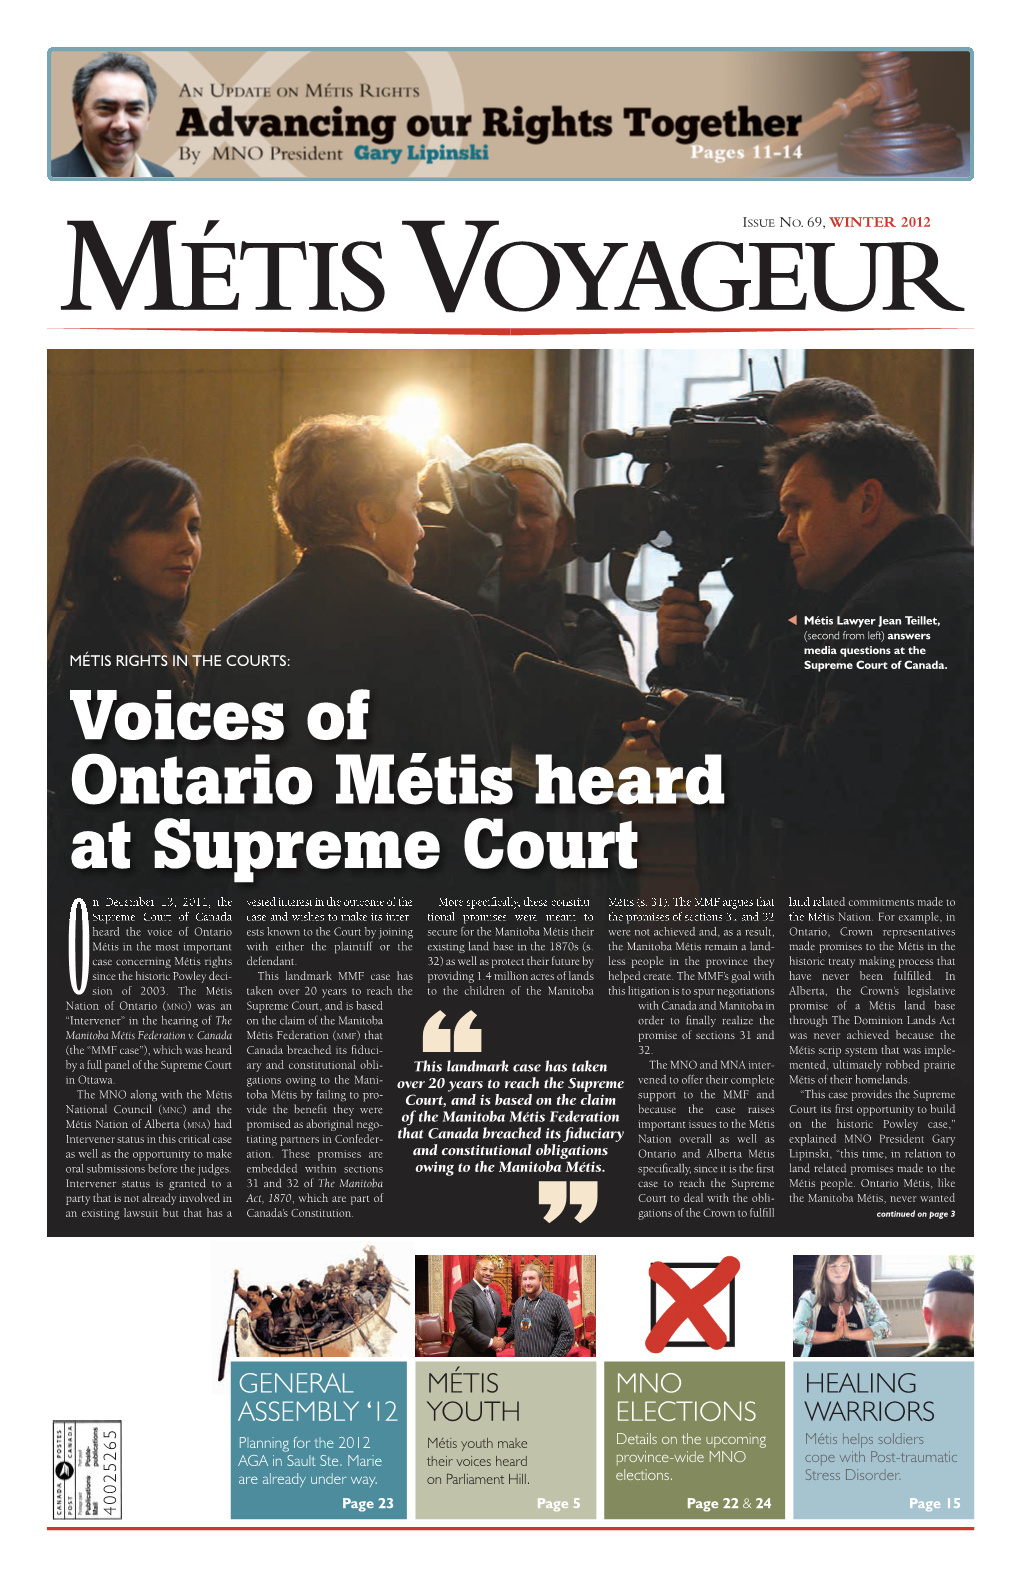 Voices of Ontario Métis Heard at Supreme Court N December 13, 2011, the Vested Interest in the Outcome of the More Speciﬁcally, These Constitu- Métis (S